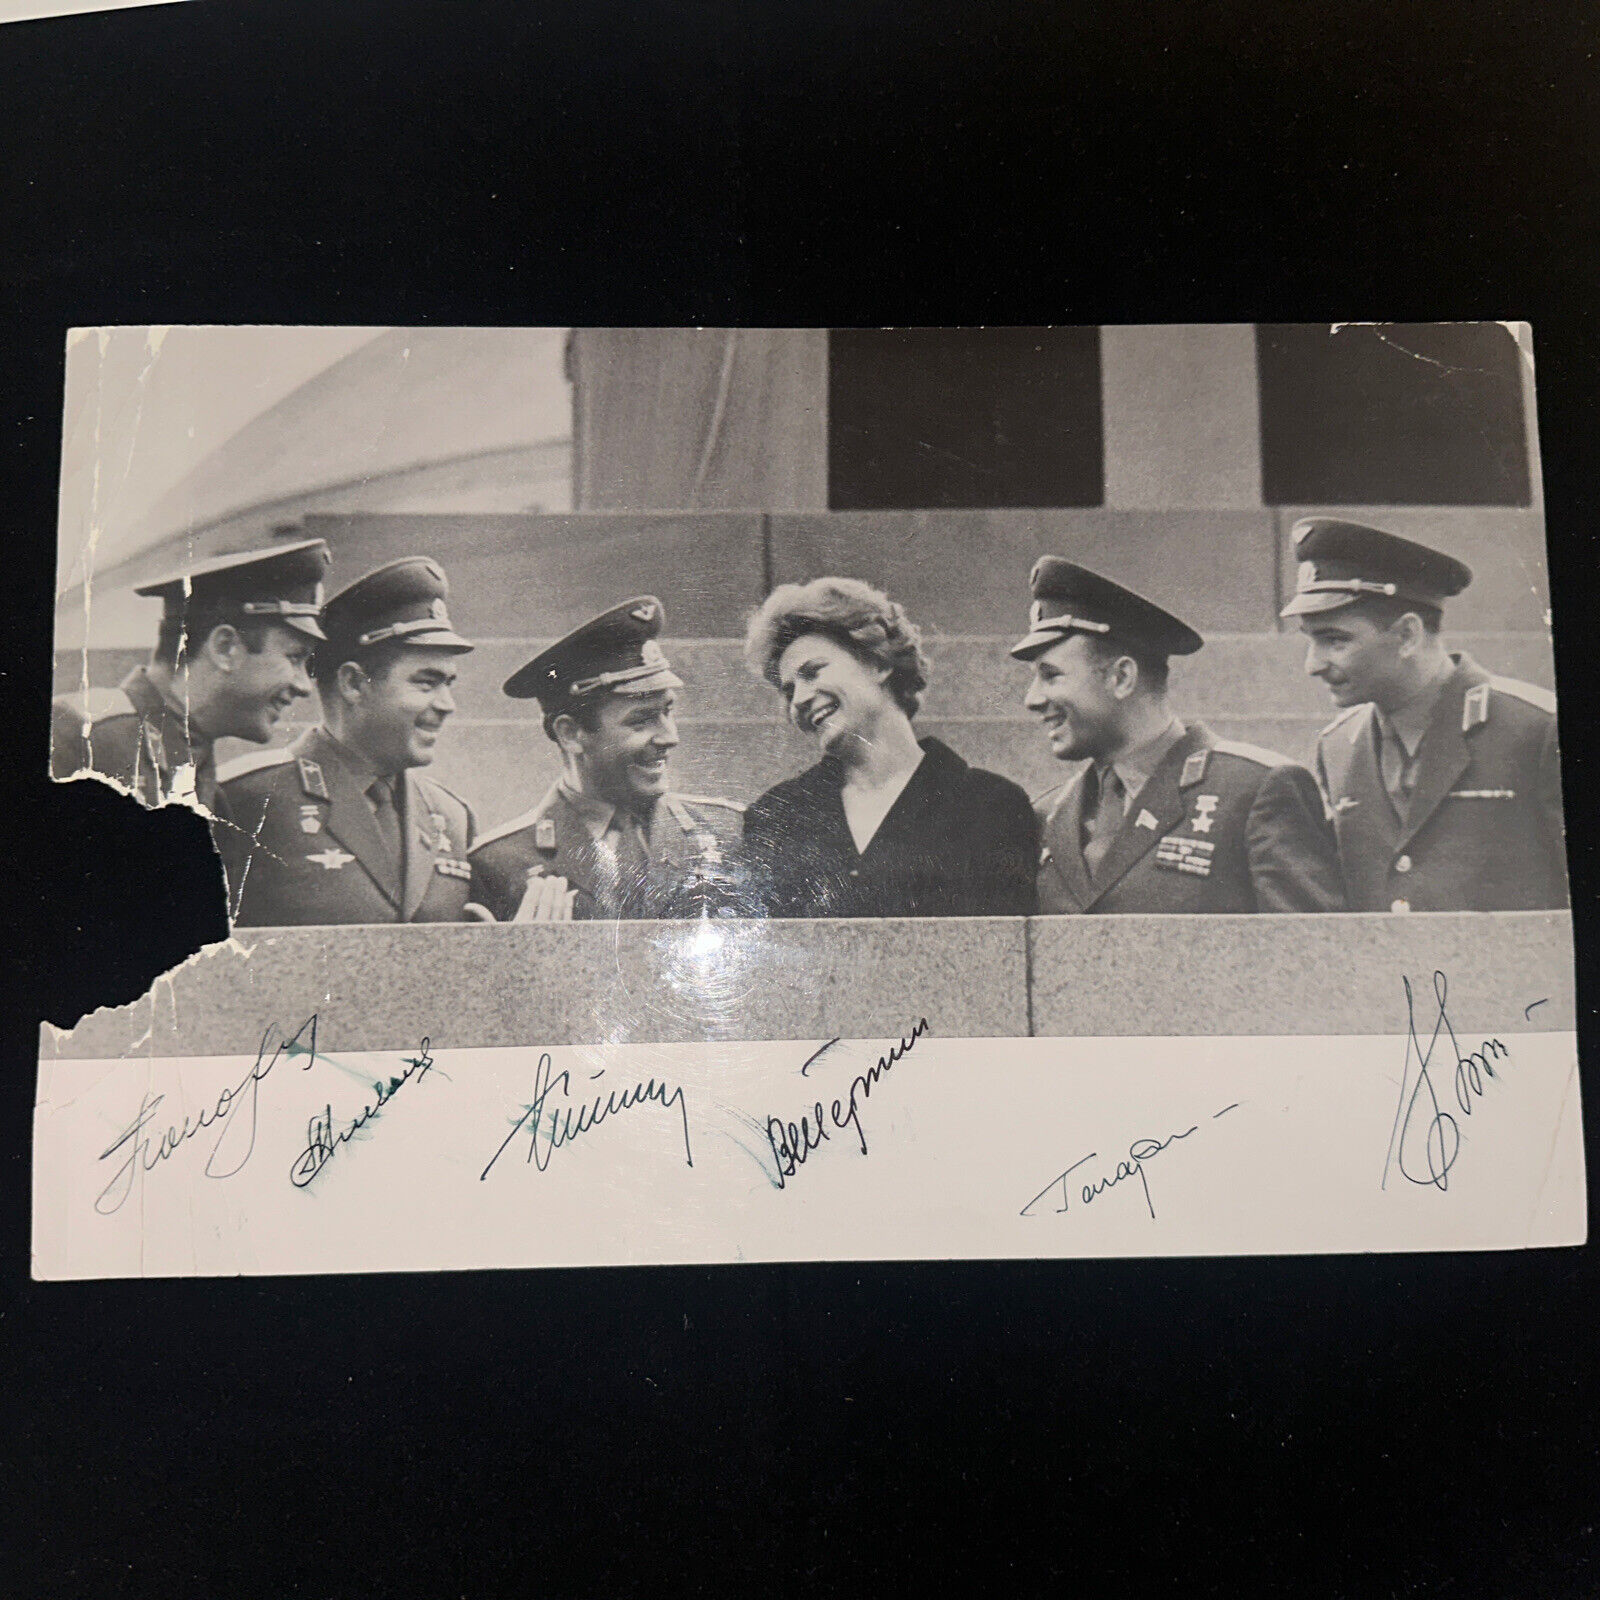 First 6 Soviet Russian Cosmonauts In Space Signed Photograph - Gagarin, +5 - JSA